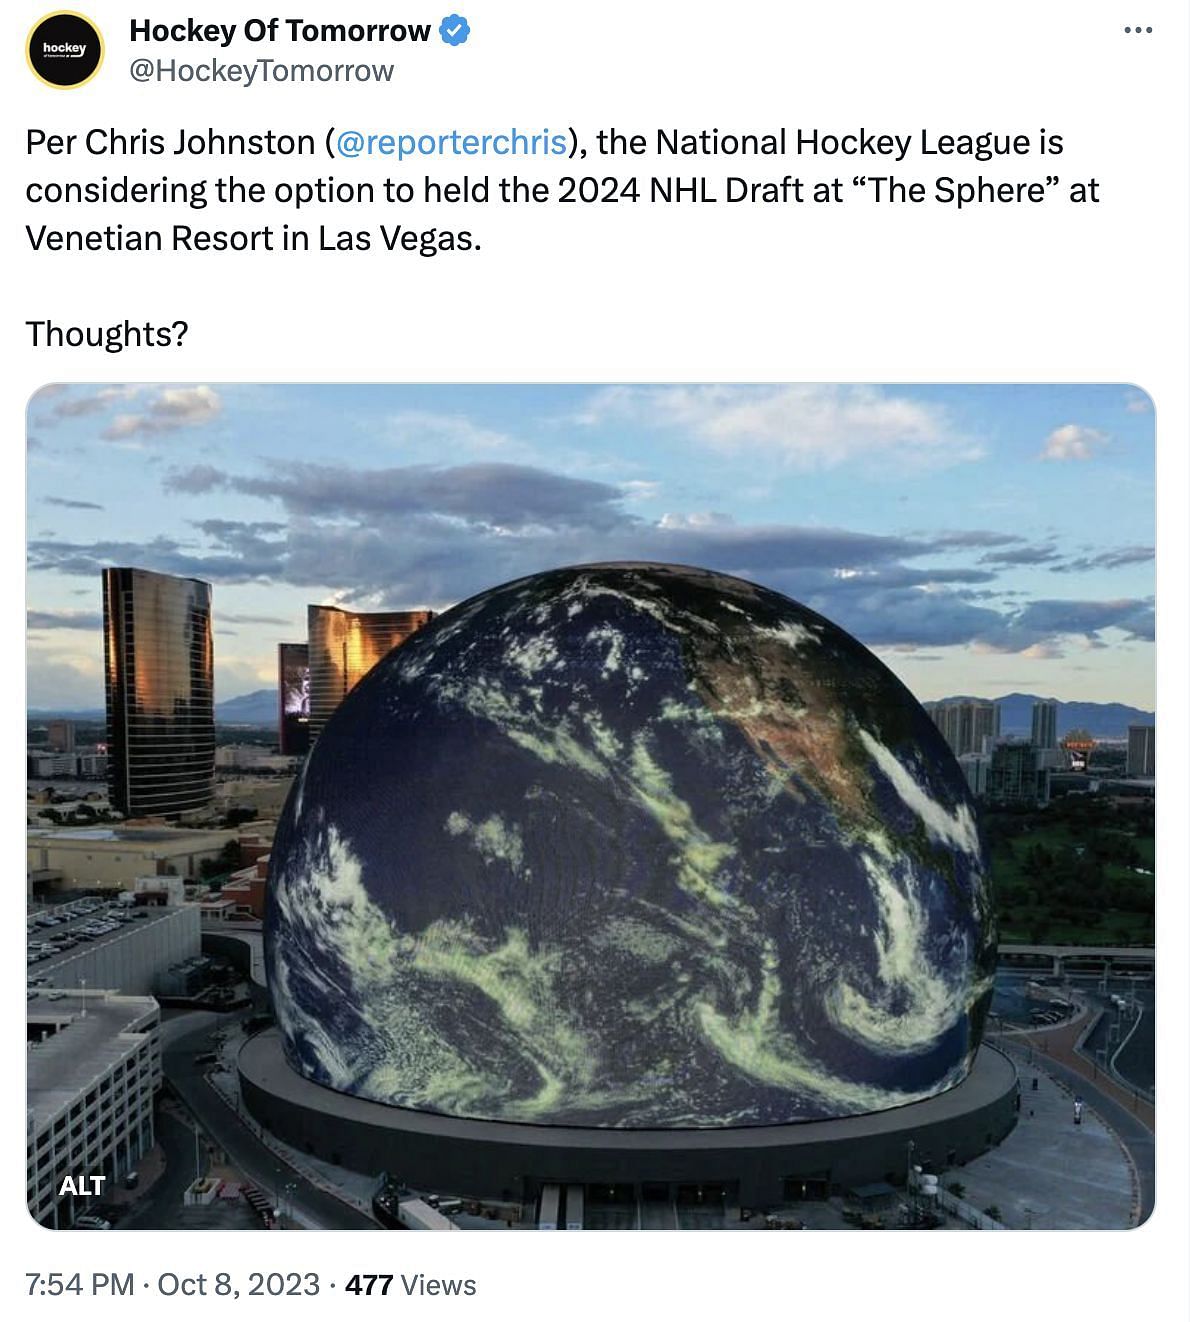 2024 NHL Draft to be held at 2.3 billion location The Sphere, Las